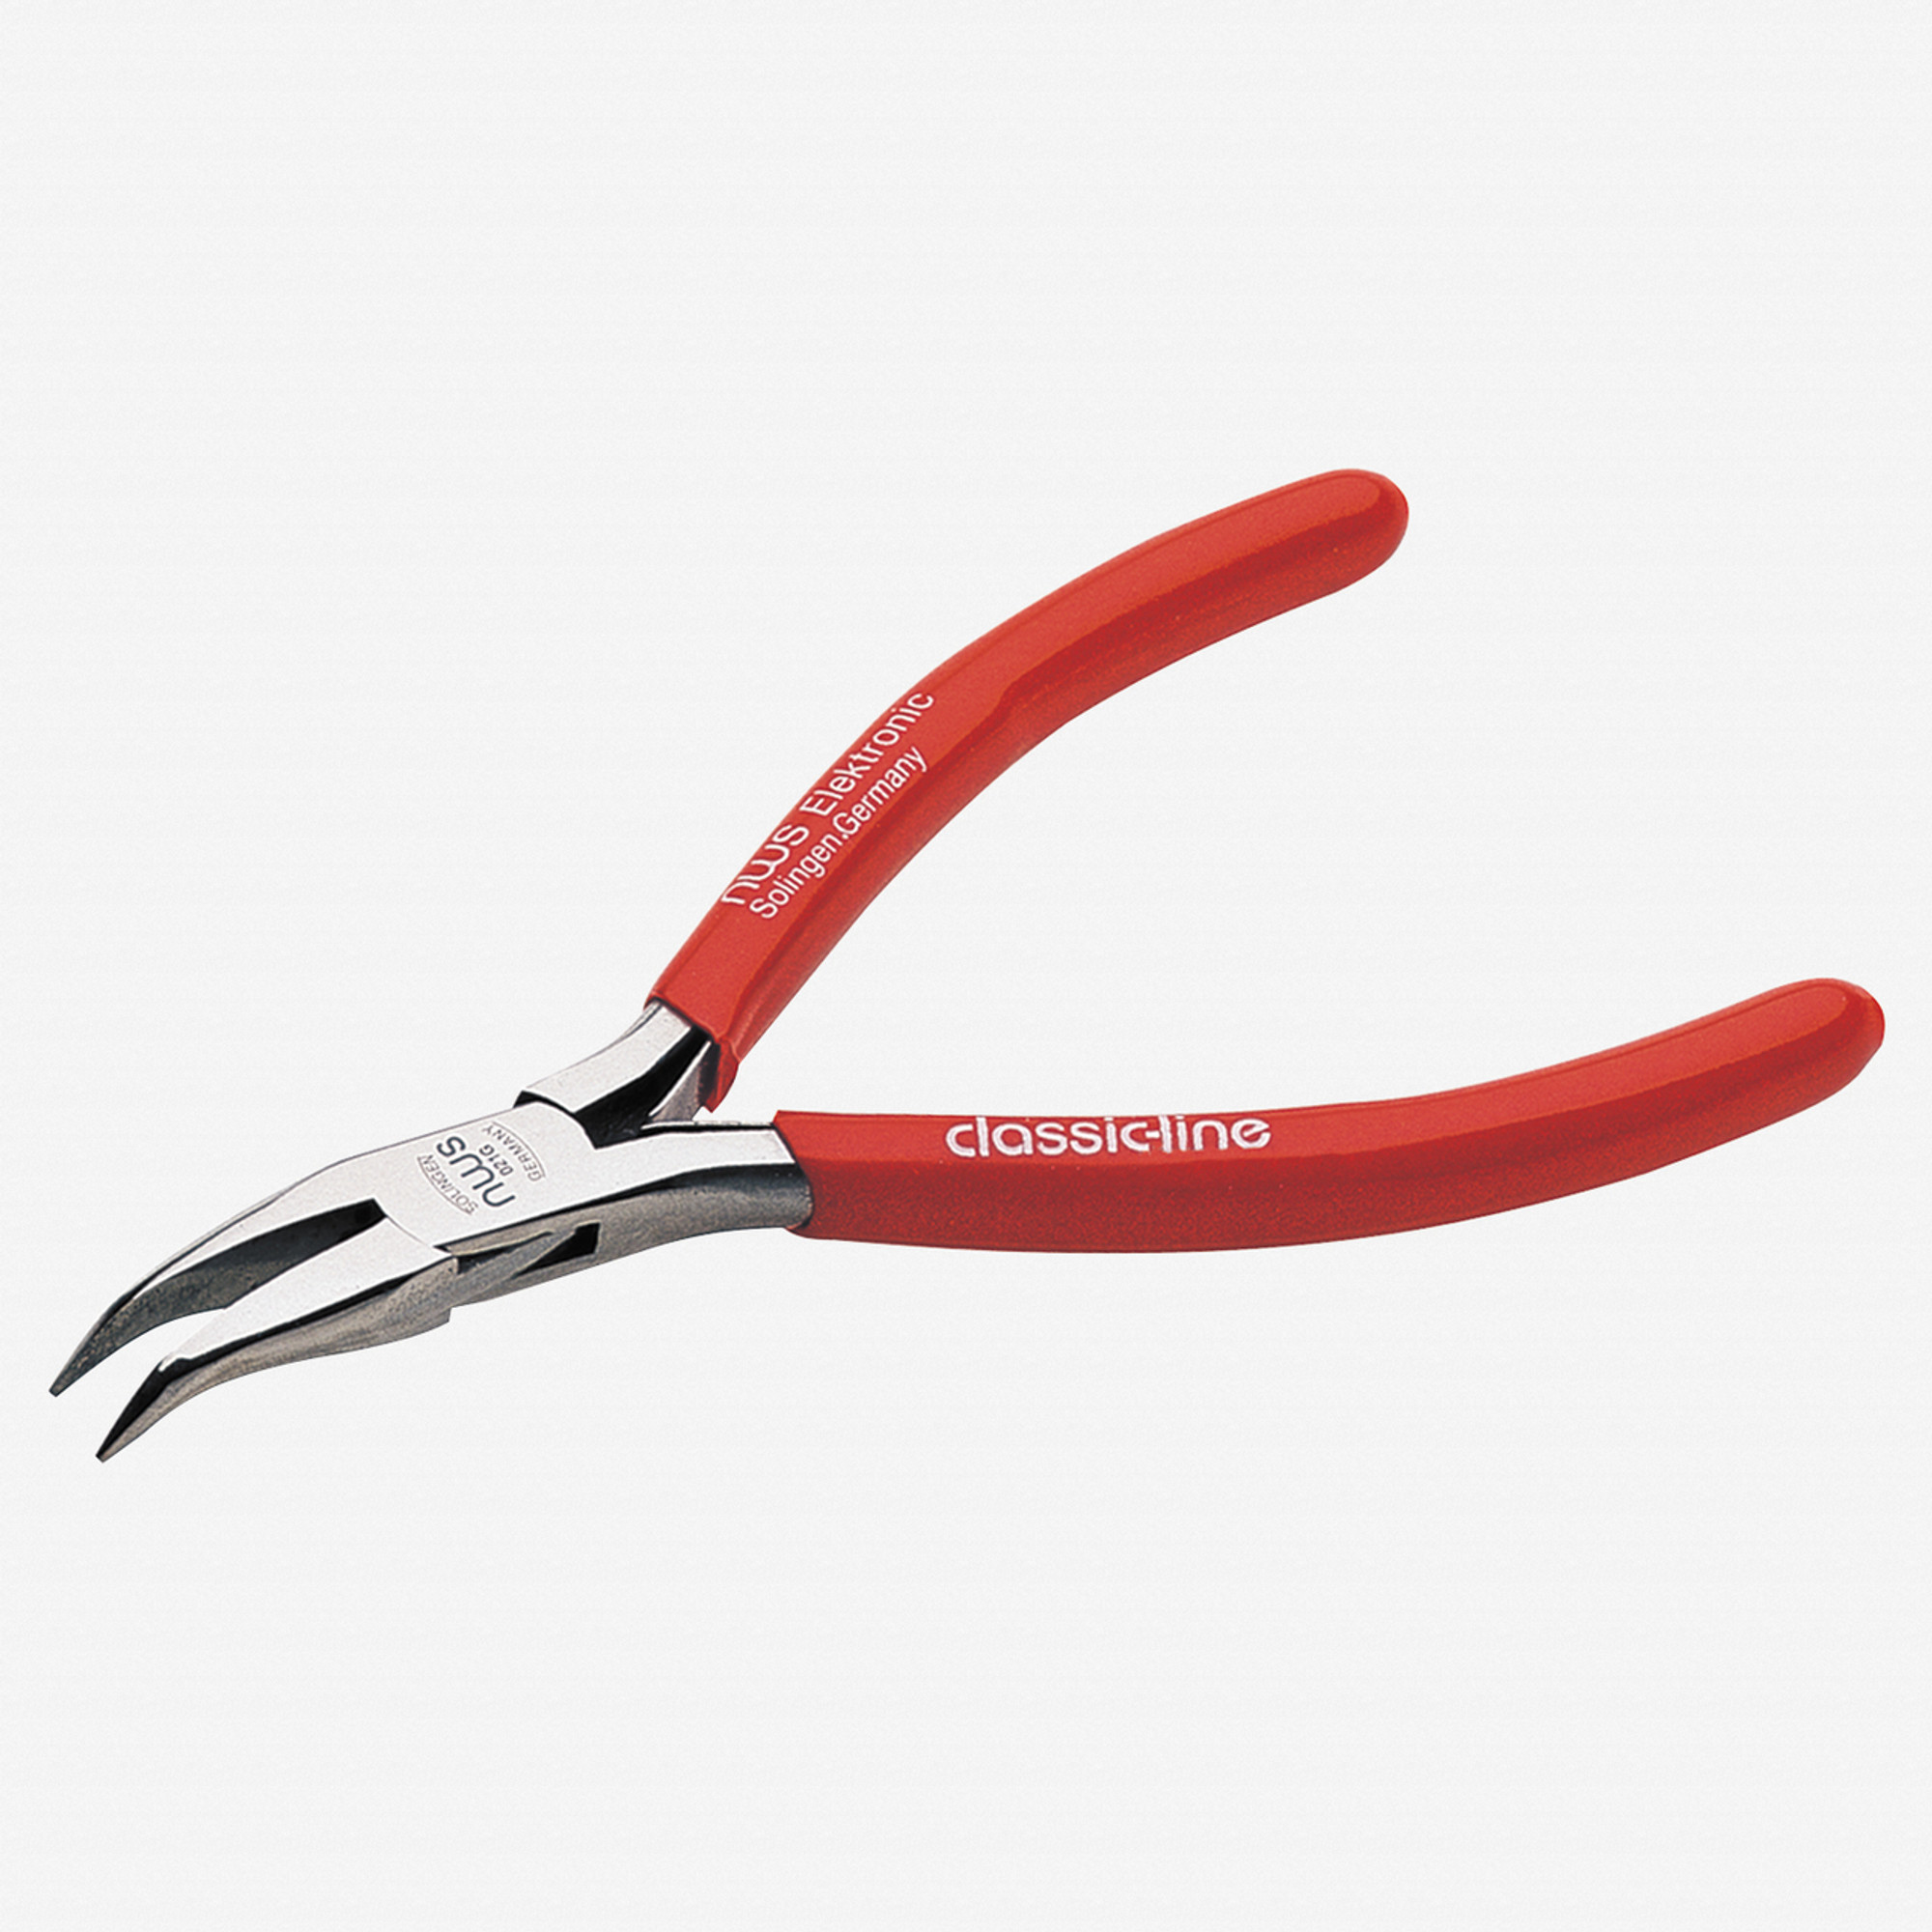 NWS 5.75 Bent Chain Nose Pliers - 45 Degree - MicroFinish - Plastic Grip